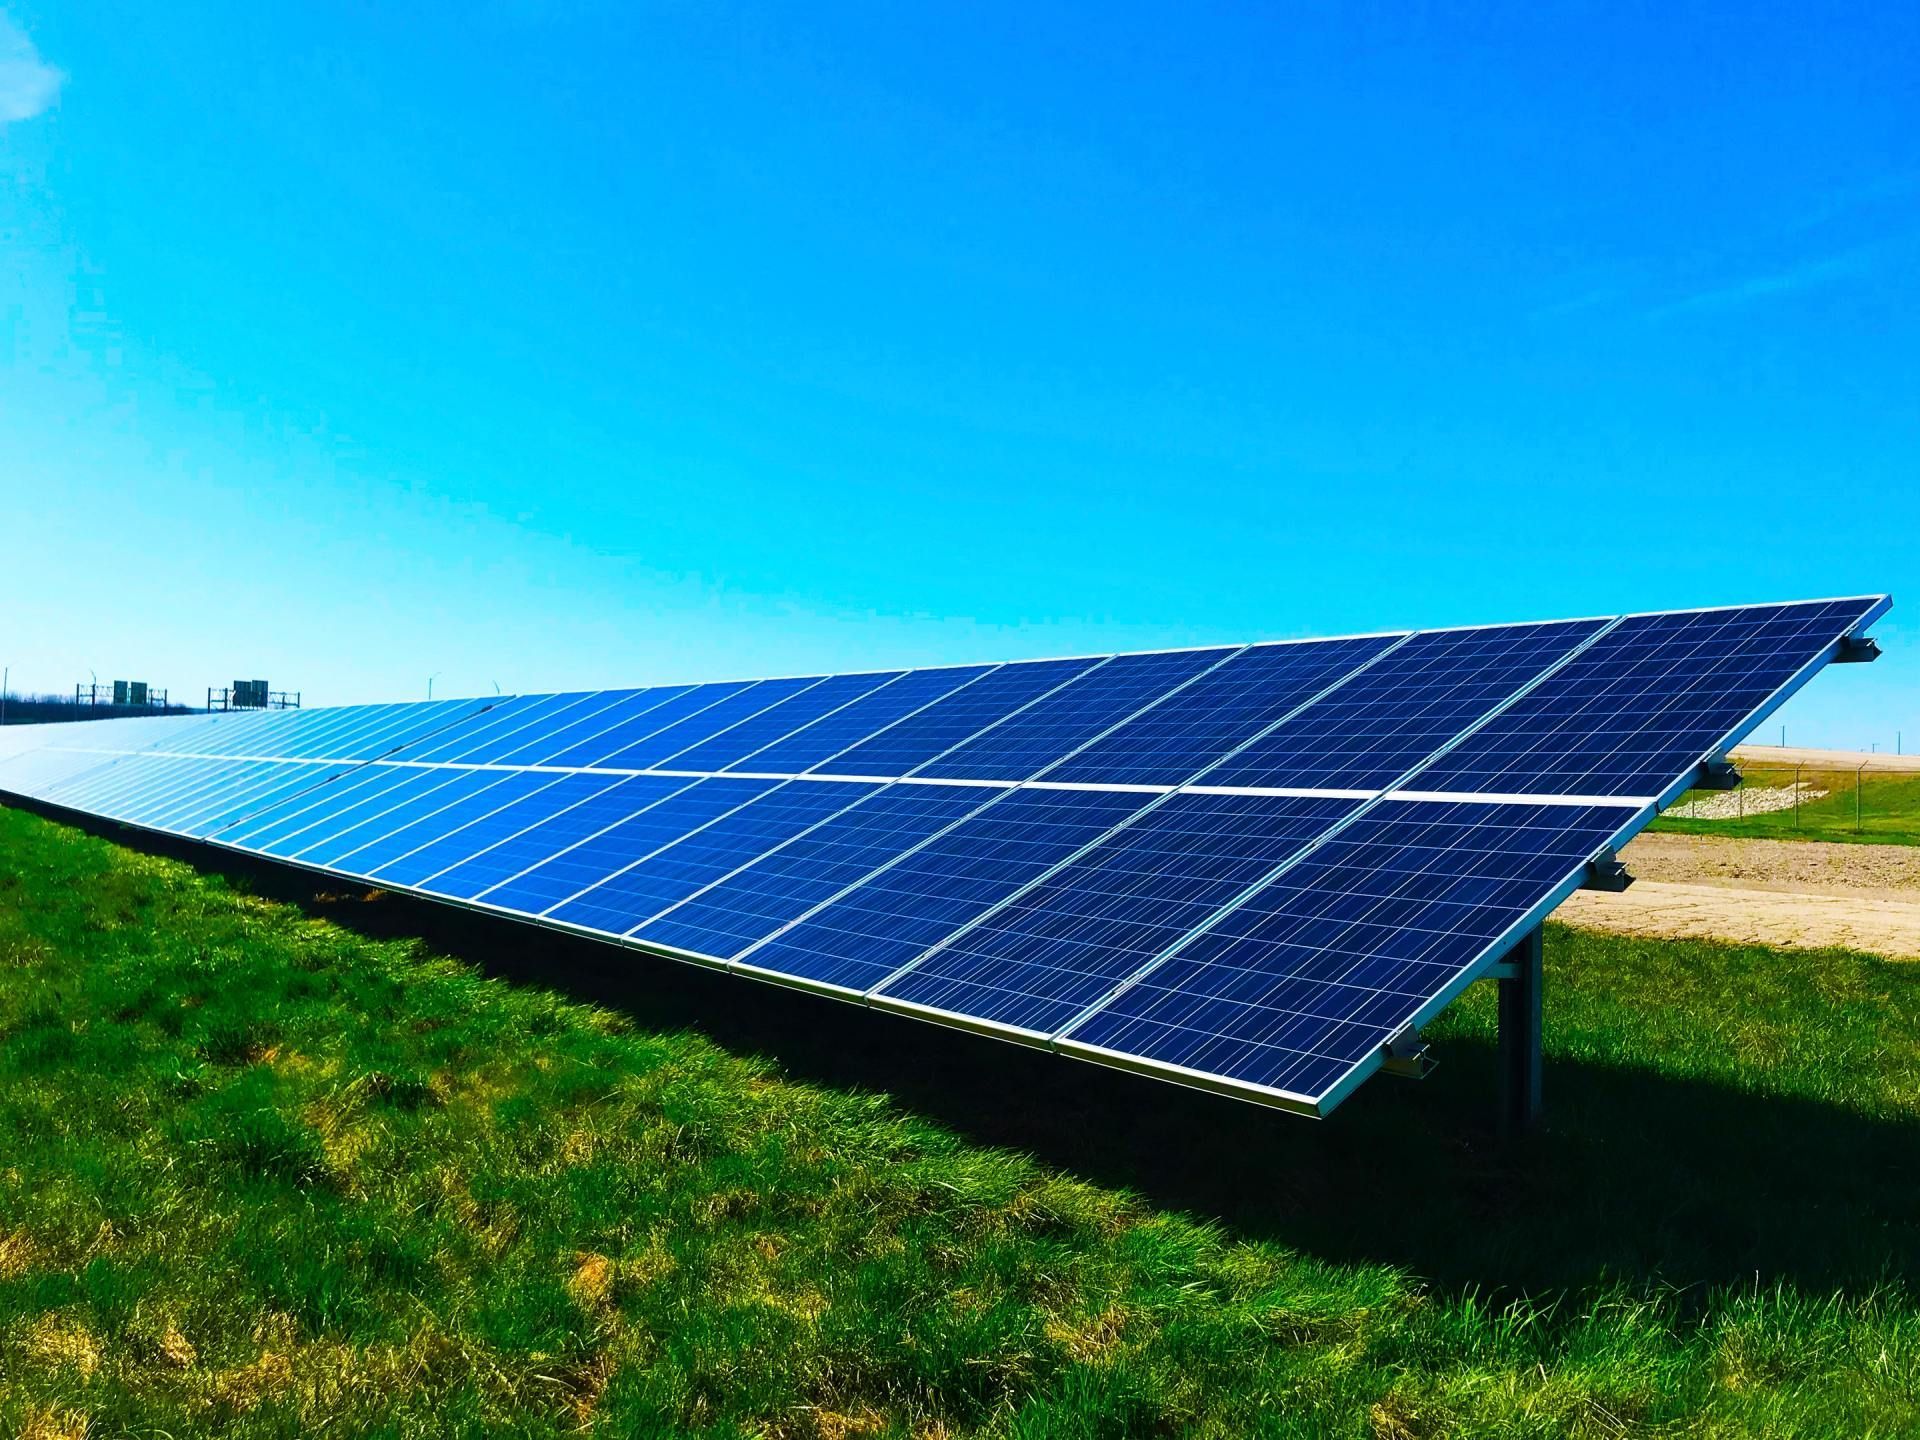 a row of solar panels in a grassy field